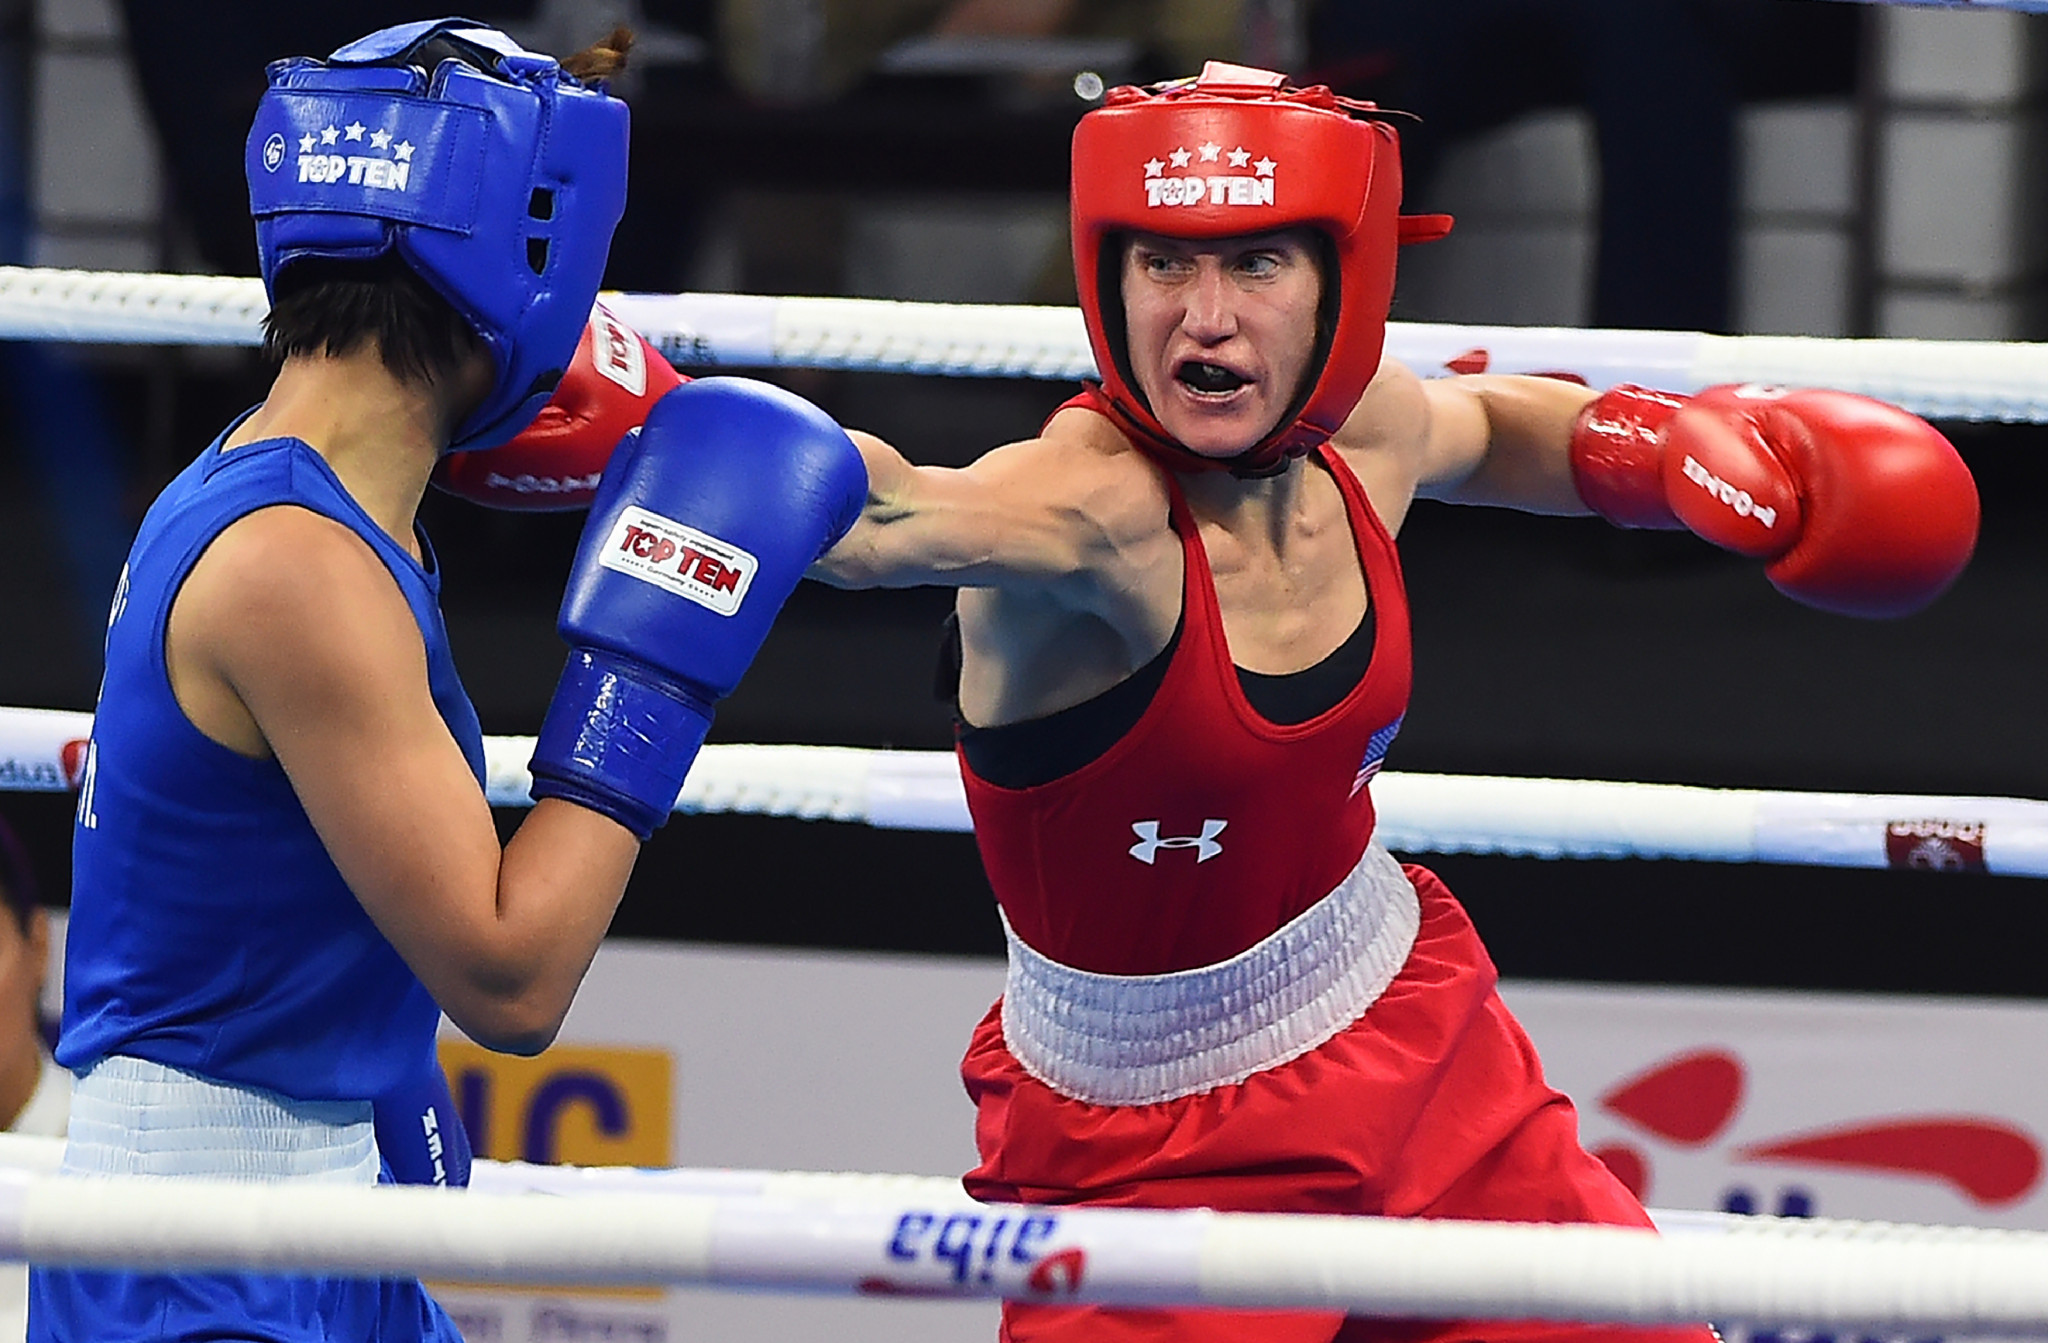 Virginia Fuchs, winner of the bronze medal at the 2018 New Delhi World Boxing Championships, will attend the multi-nation training camp at the U.S. Olympic Training Center in Colorado Springs ©Getty Images